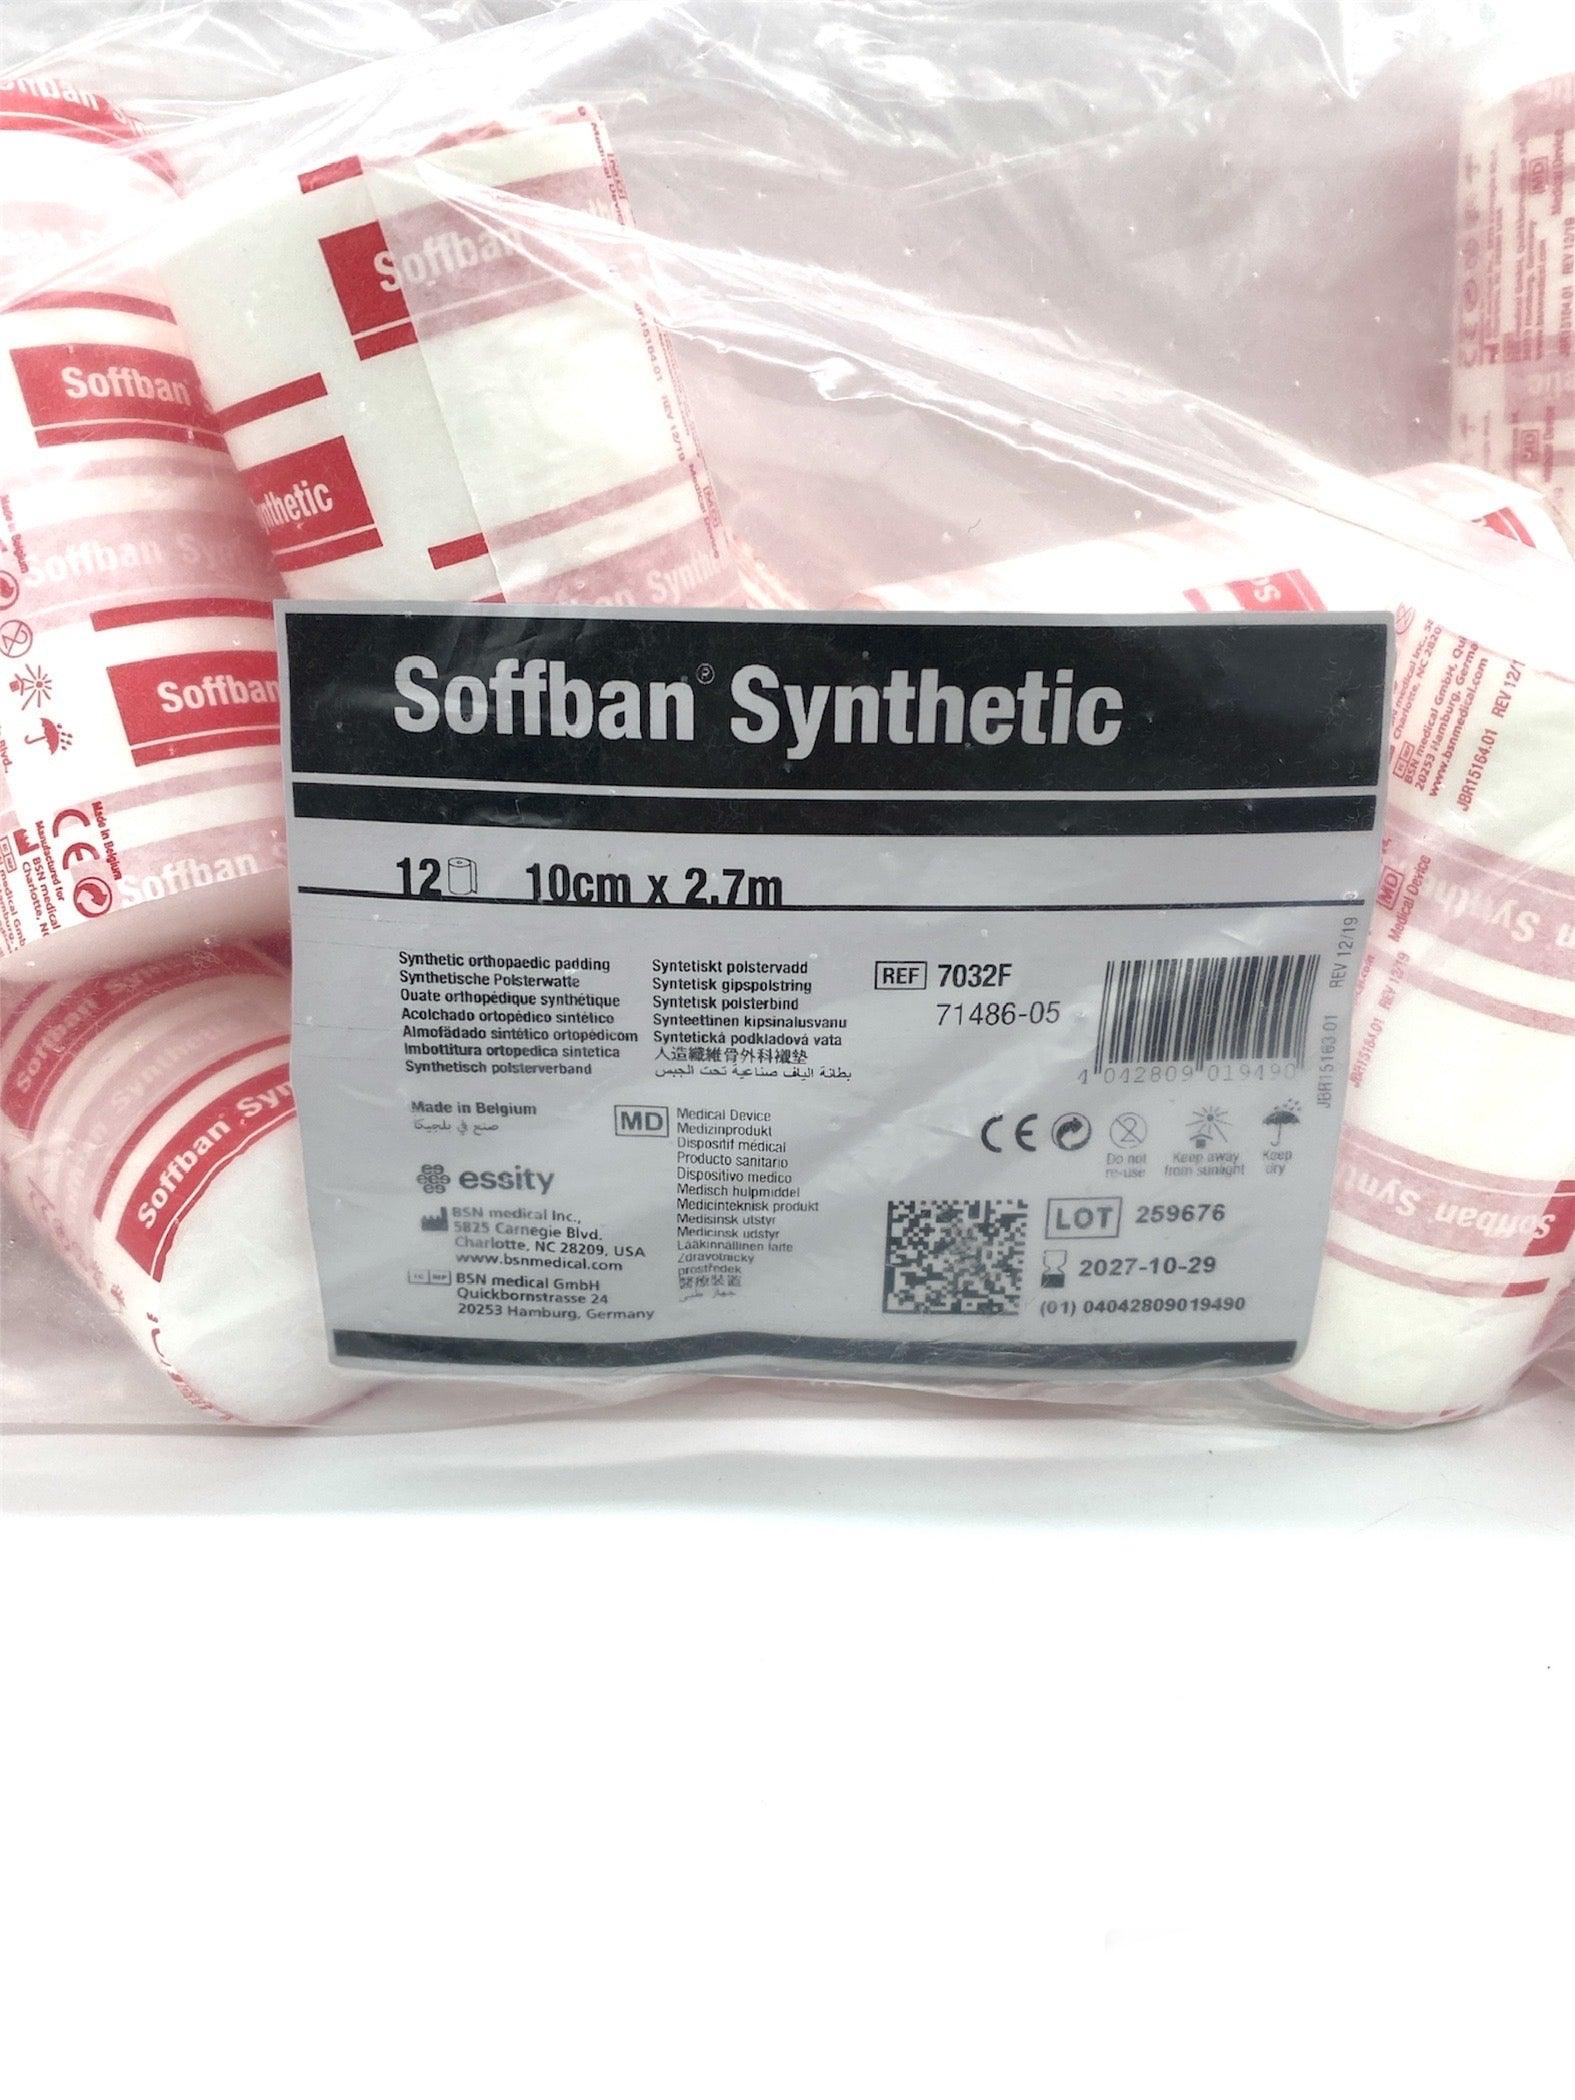 Soffban Synthetic